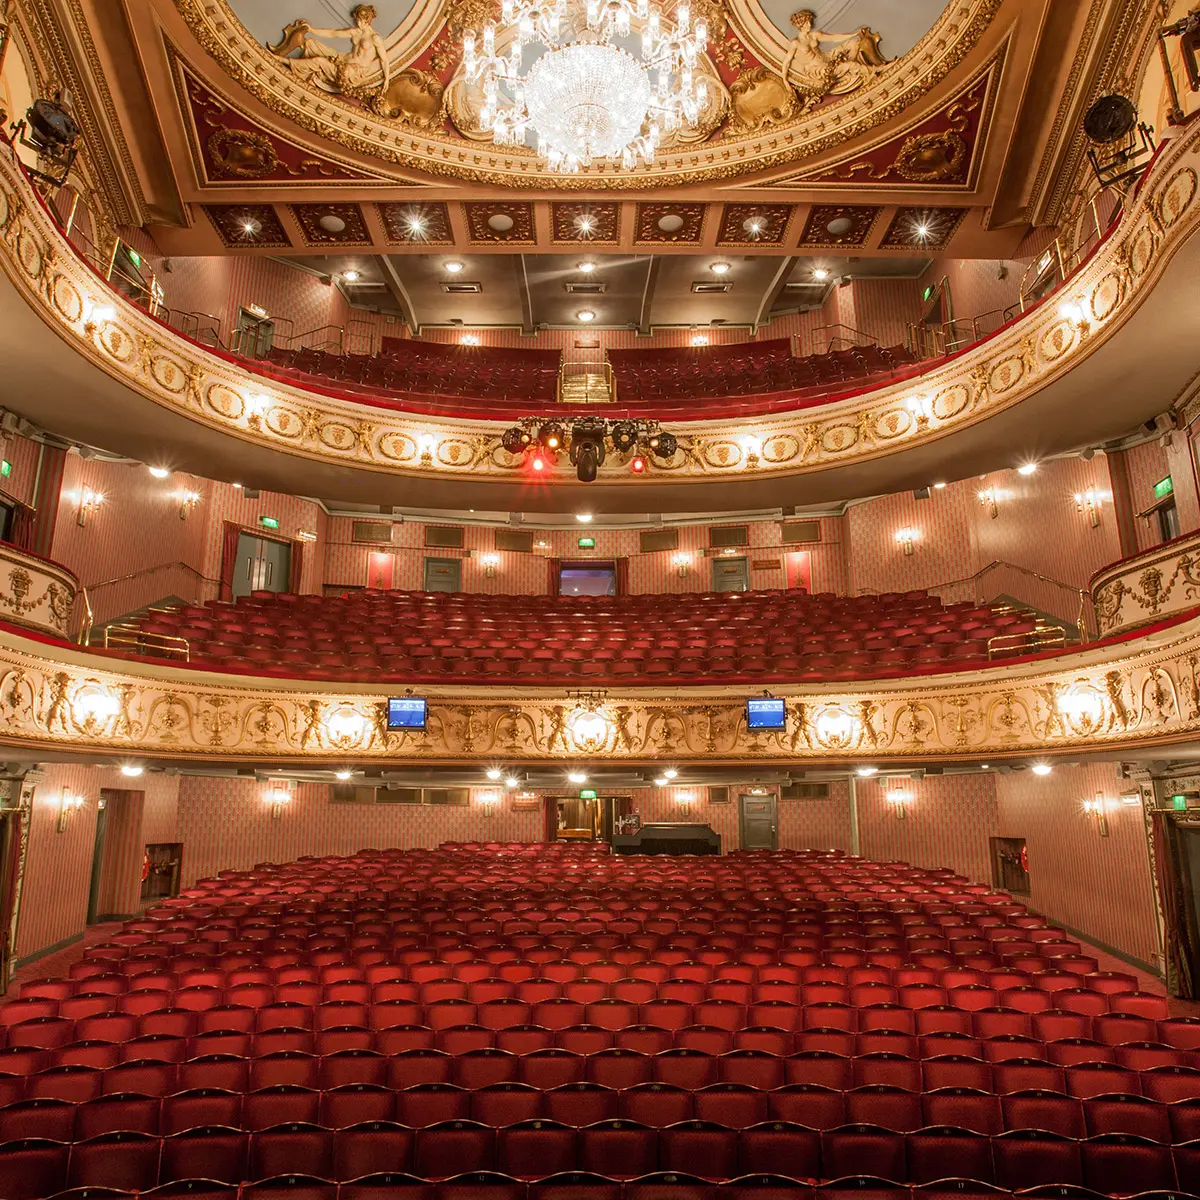 The auditorium viewed from the stage at the Sondheim Theatre in London's West End